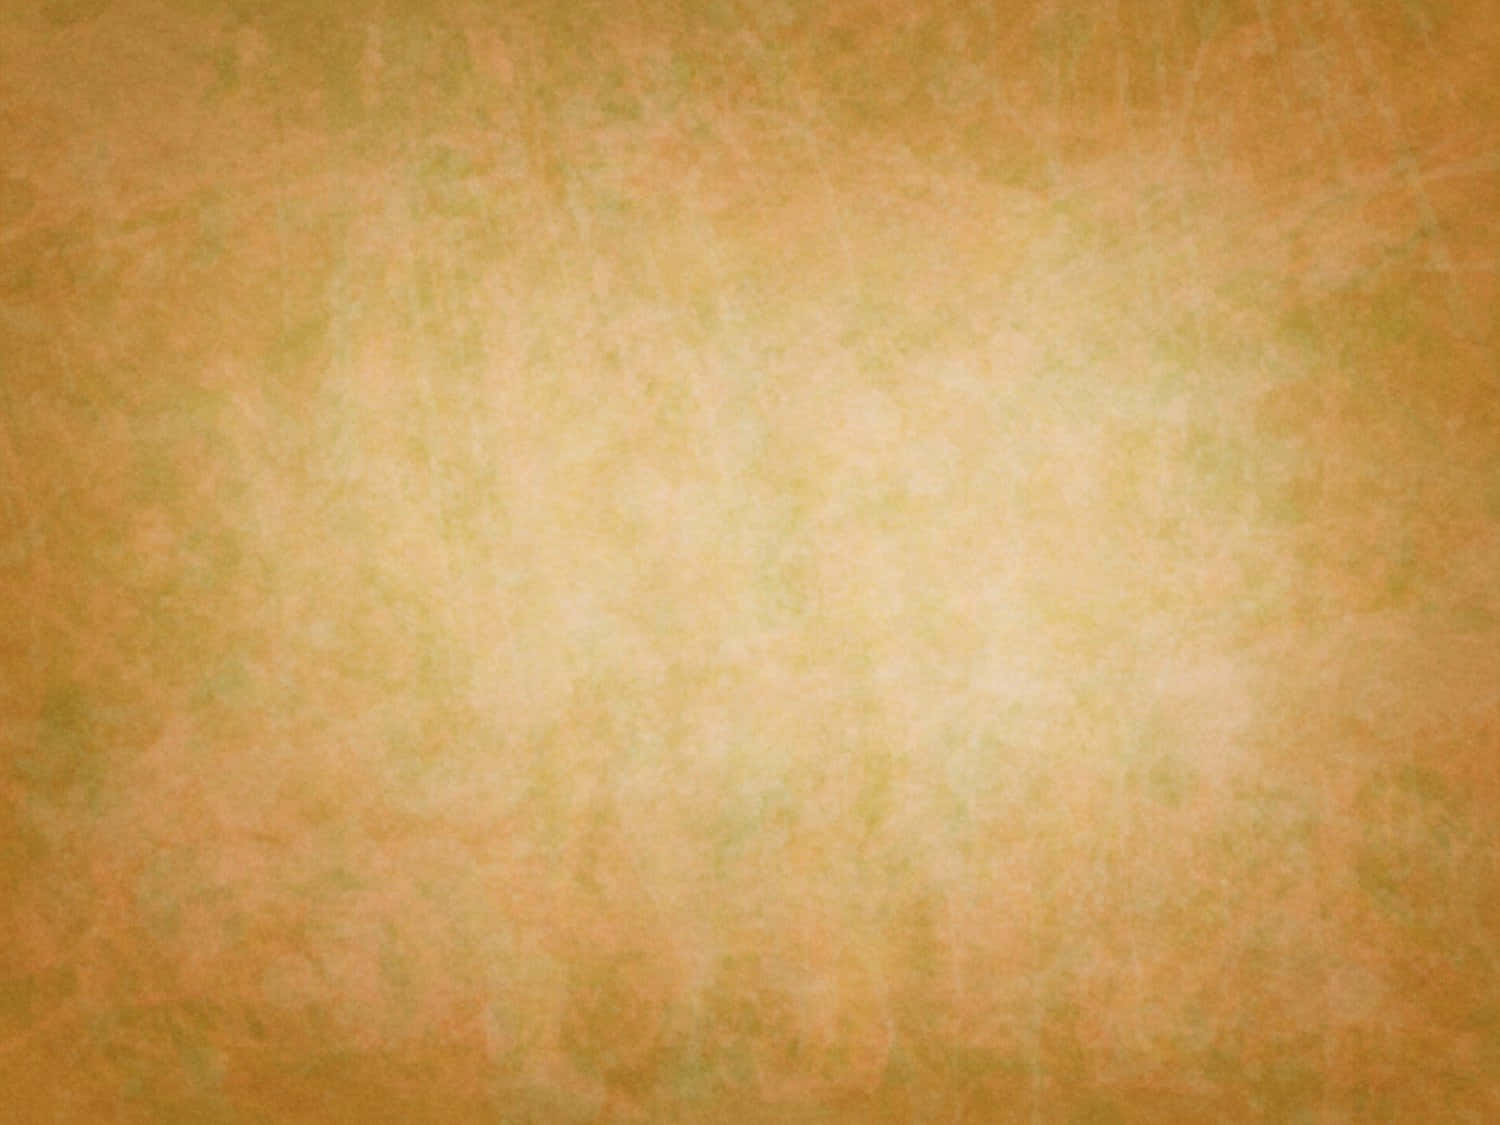 A Yellow And Brown Background With A Texture